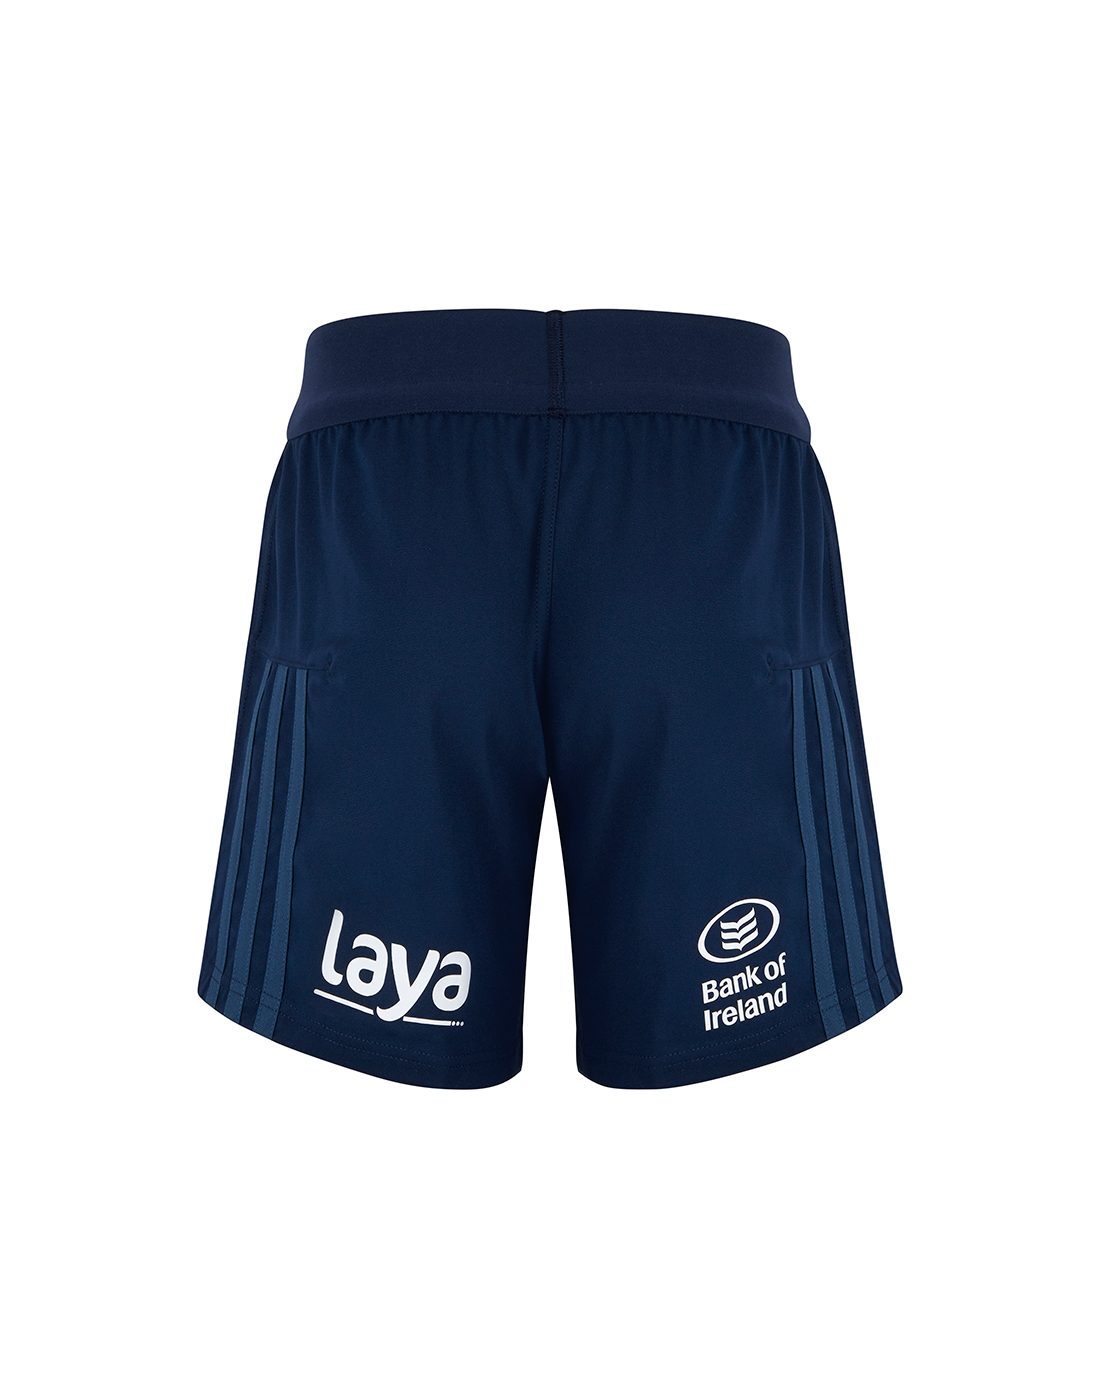 lifestyle sports leinster rugby